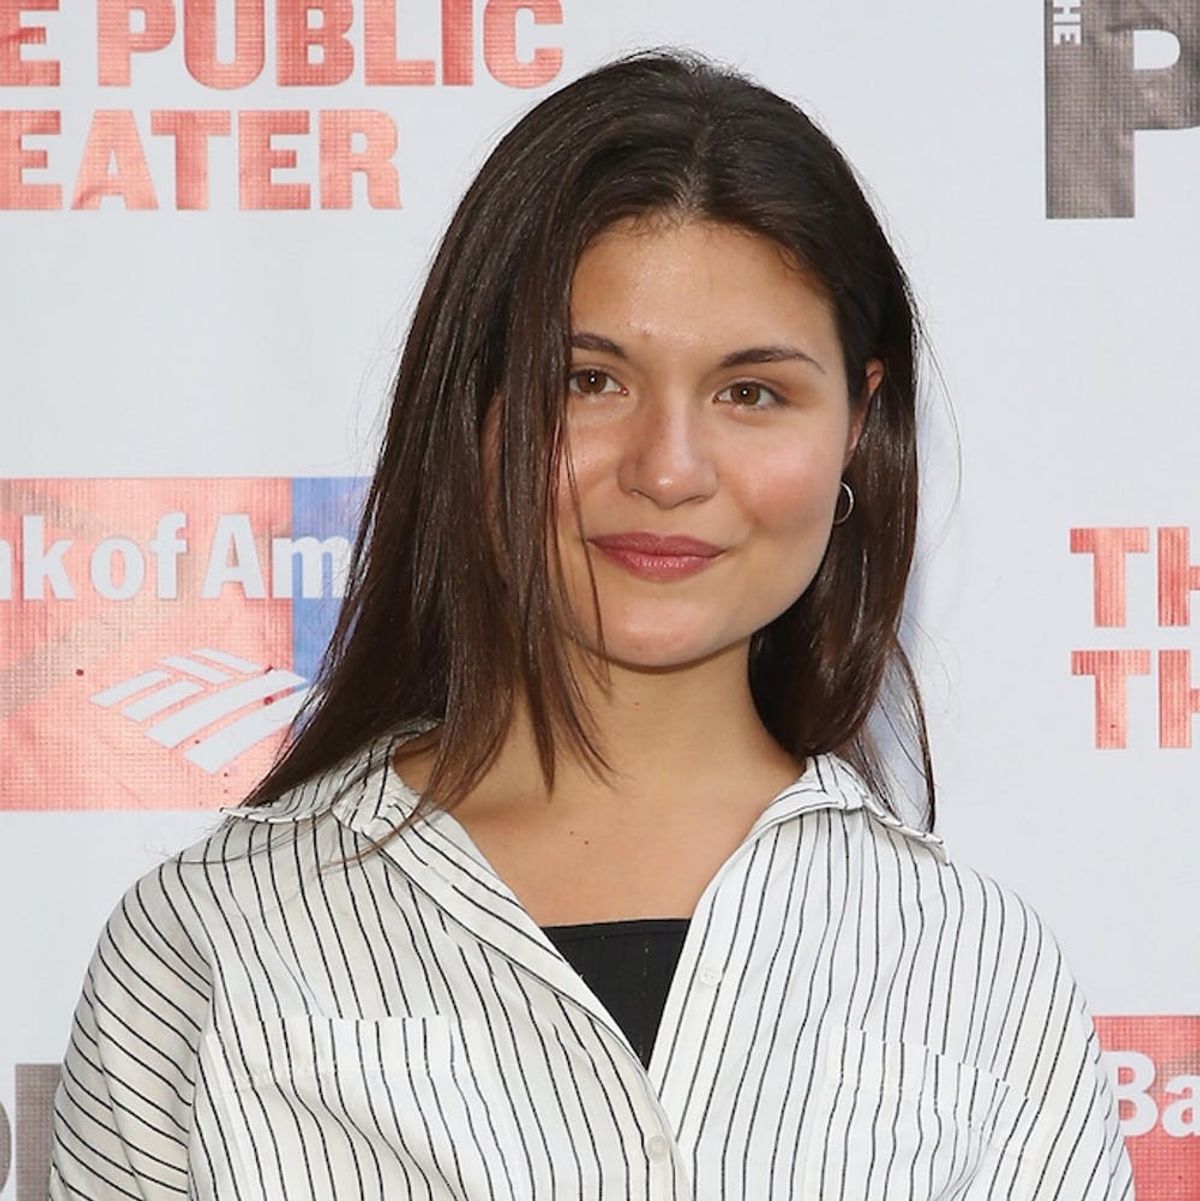 Hamilton’s Phillipa Soo Got Engaged on Valentine’s Day Weekend With This Gorgeous Non-Traditional Ring